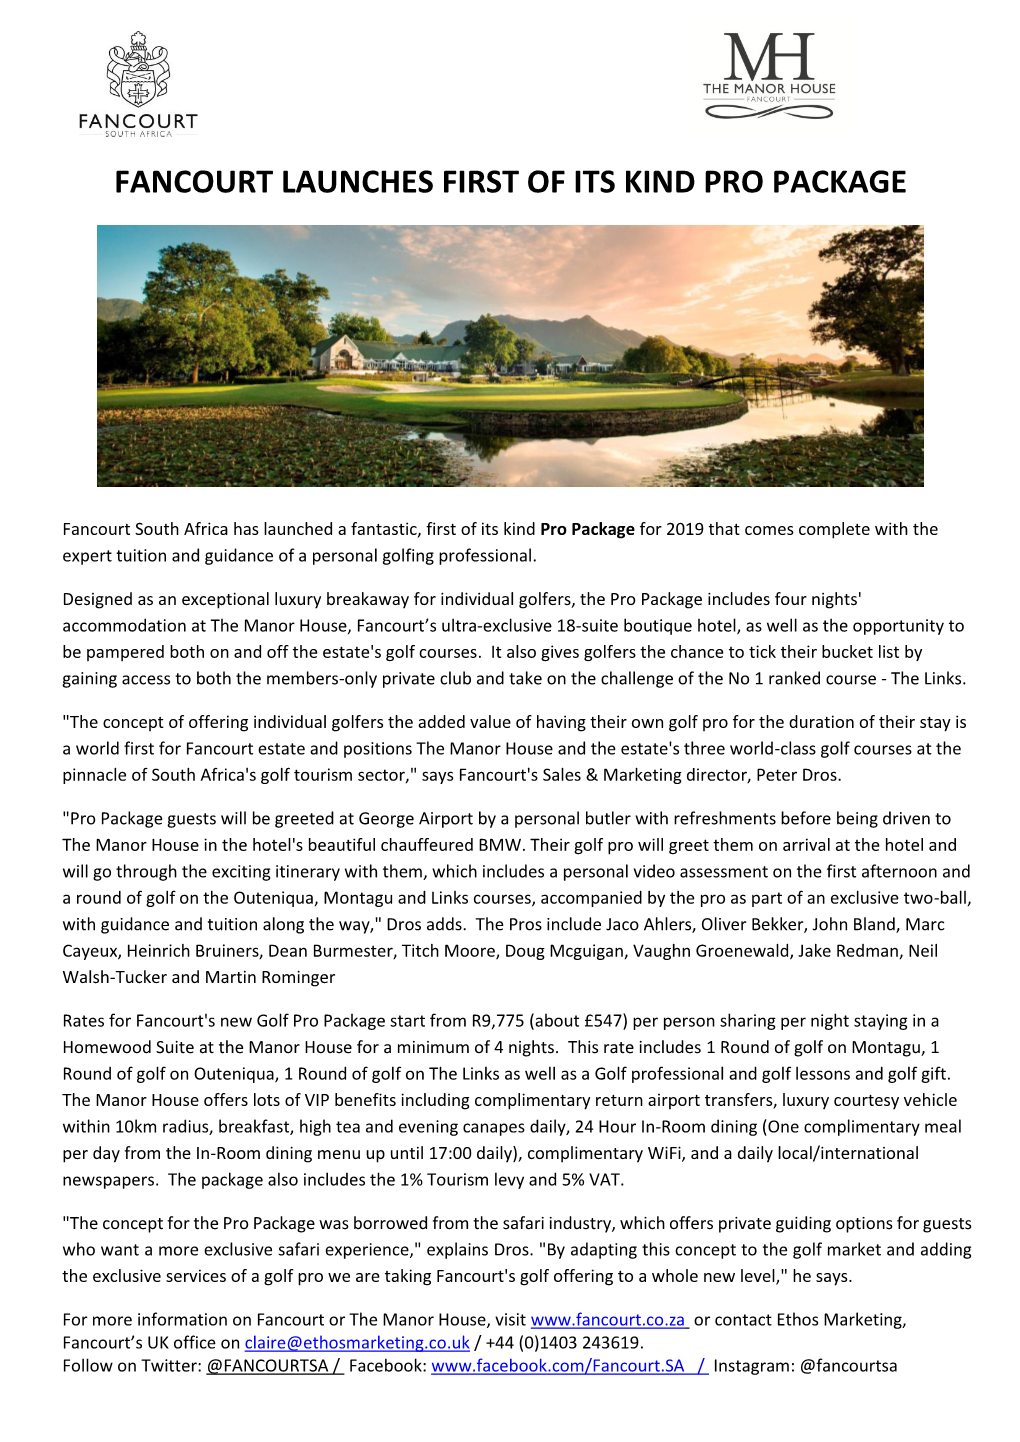 Fancourt Launches First of Its Kind Pro Package